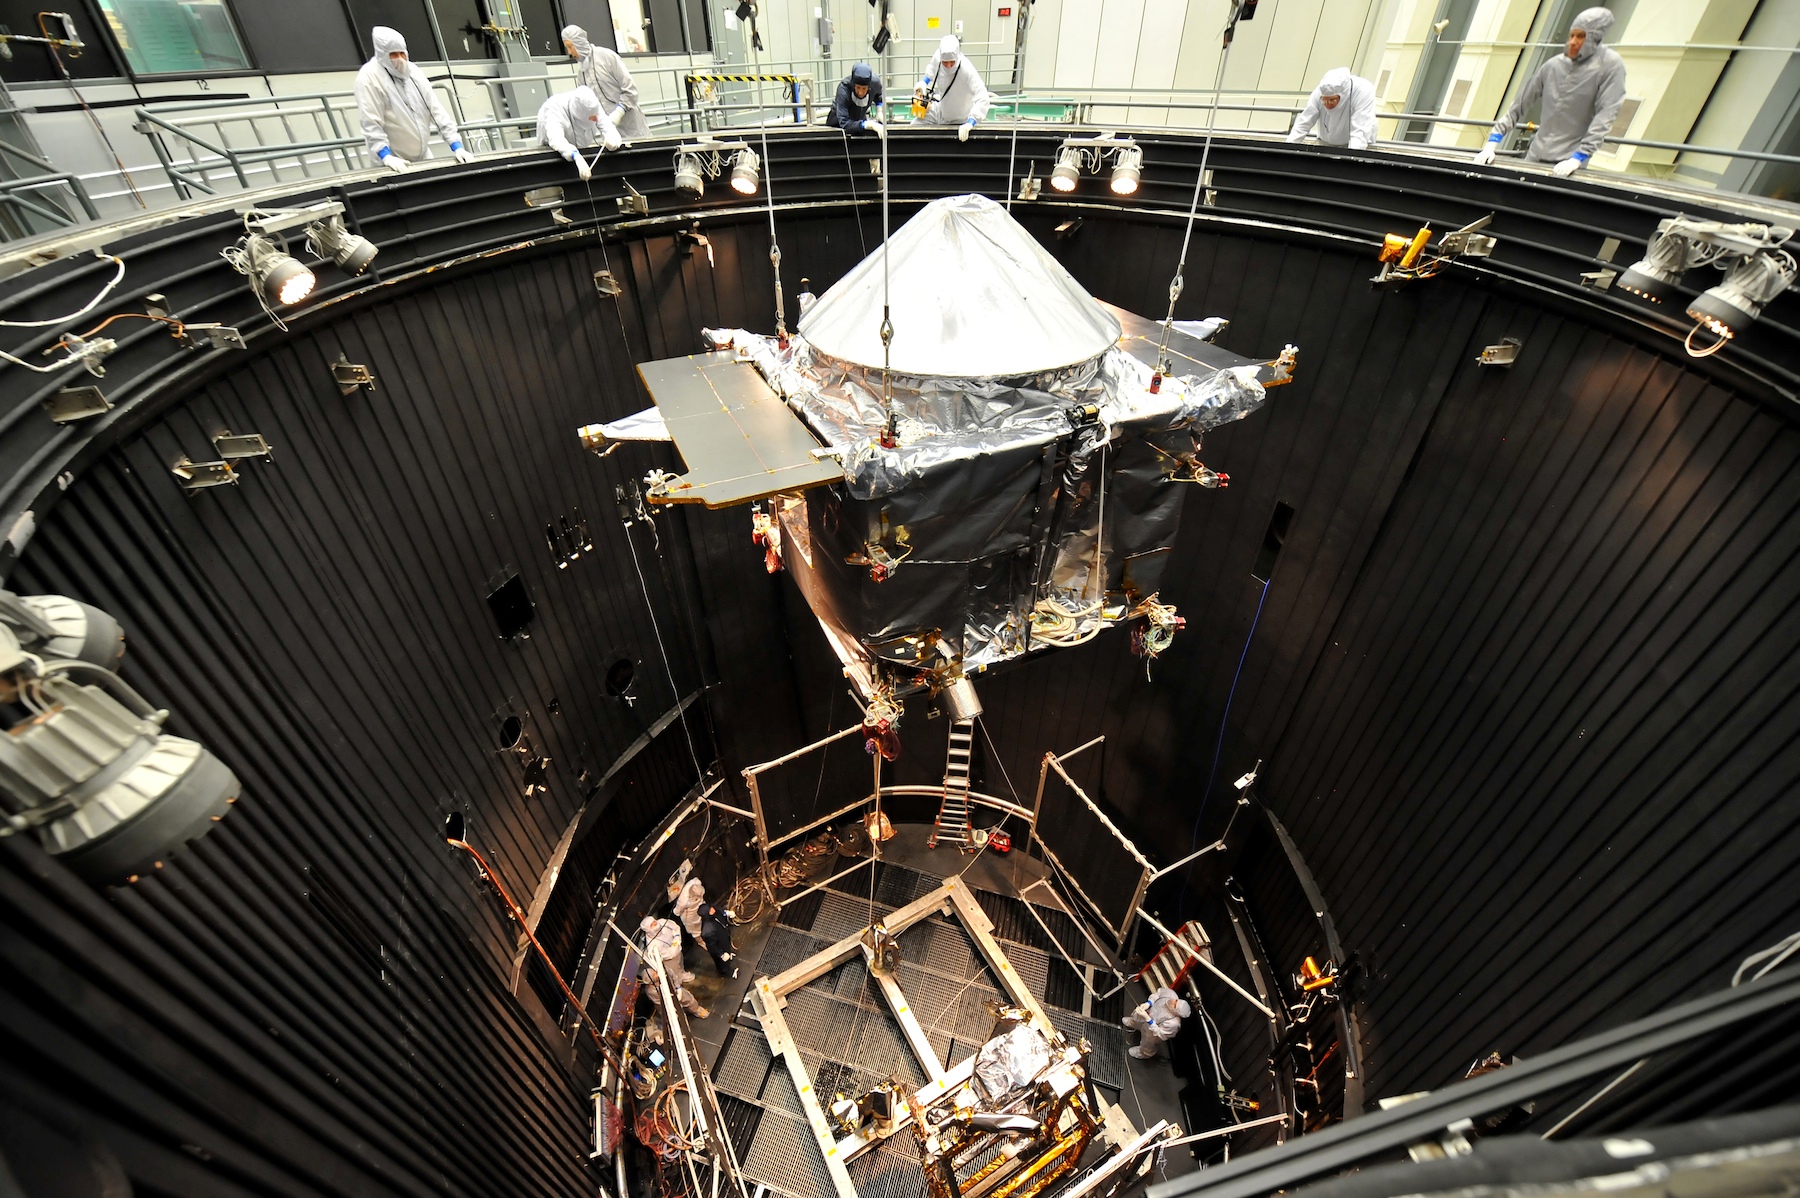 The Mars Atmosphere and Volatile Evolution (MAVEN) spacecraft is lowered into a thermal vacuum (TVAC) chamber at Lockheed Martin, near Denver, Colorado. TVAC testing ensures that the spacecraft is able to withstand the temperature extremes it will  encounter during its mission to study the upper atmosphere of Mars. (Courtesy Lockheed Martin)